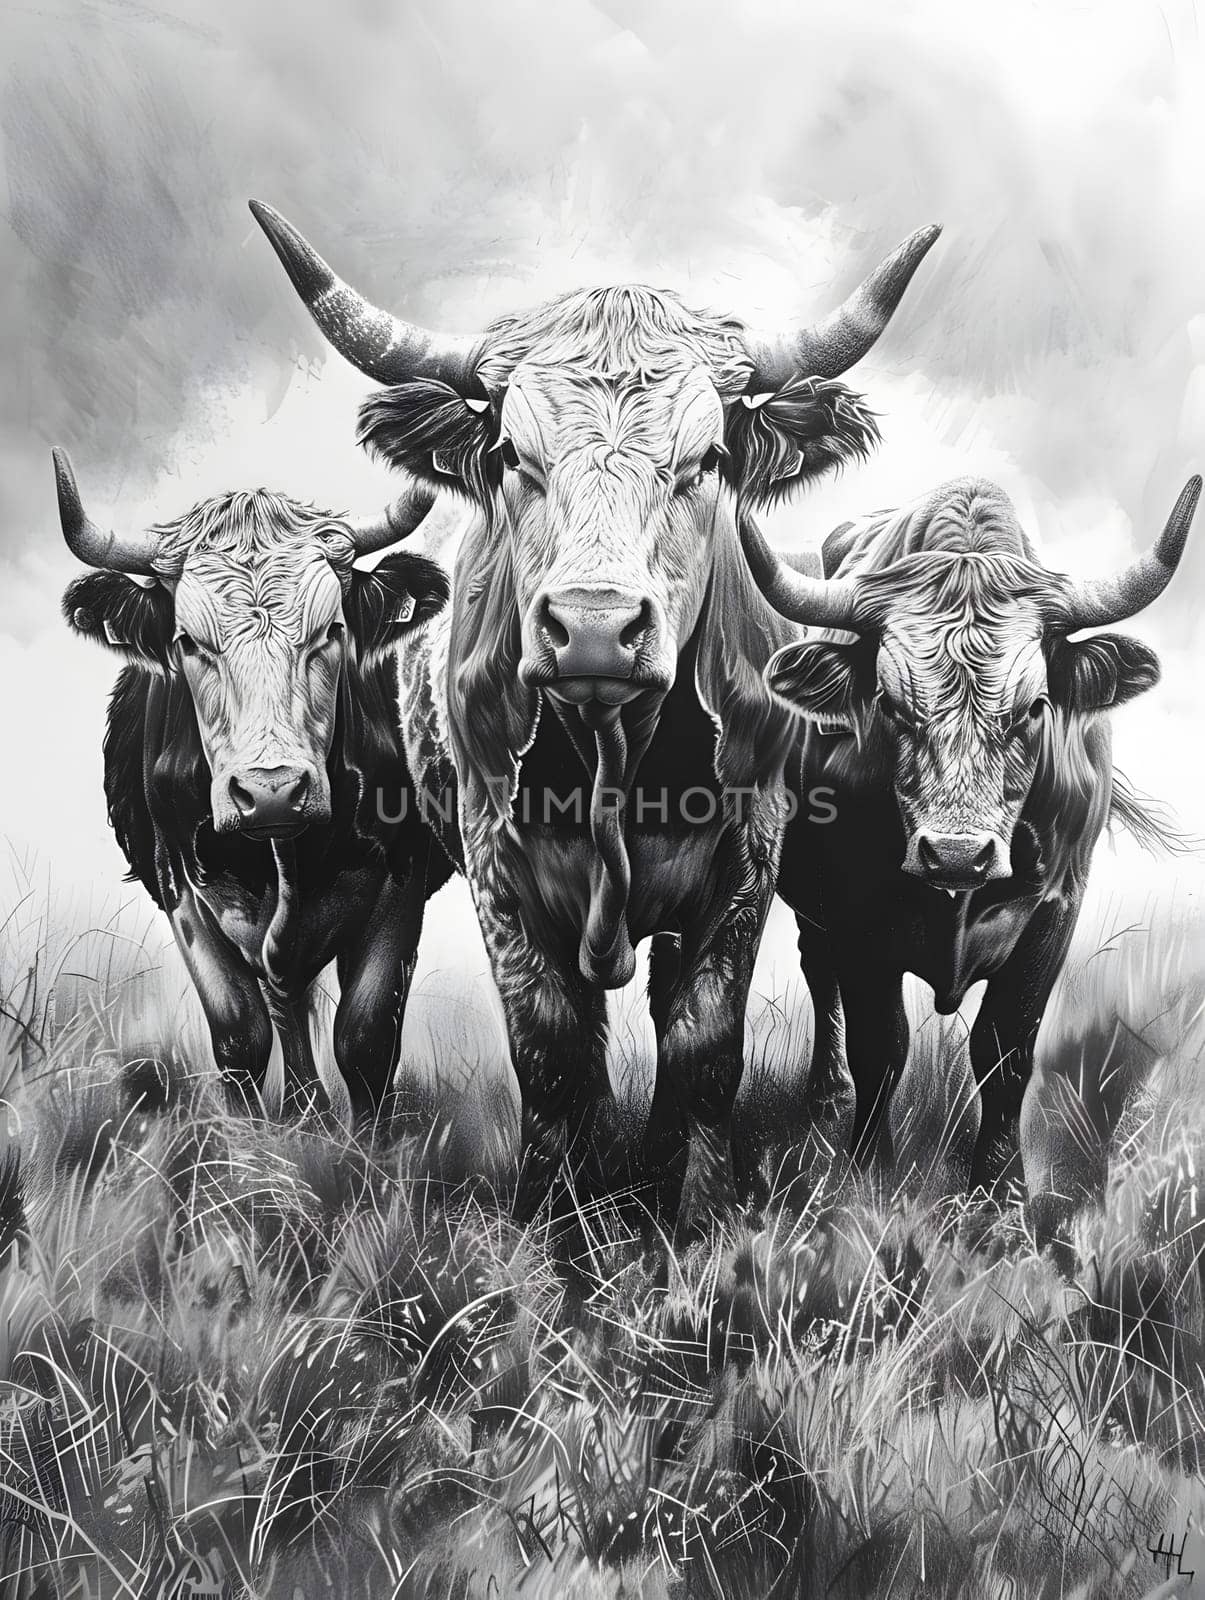 A monochrome image featuring three bulls with horns and white spots, standing in a grassy field under a clear sky